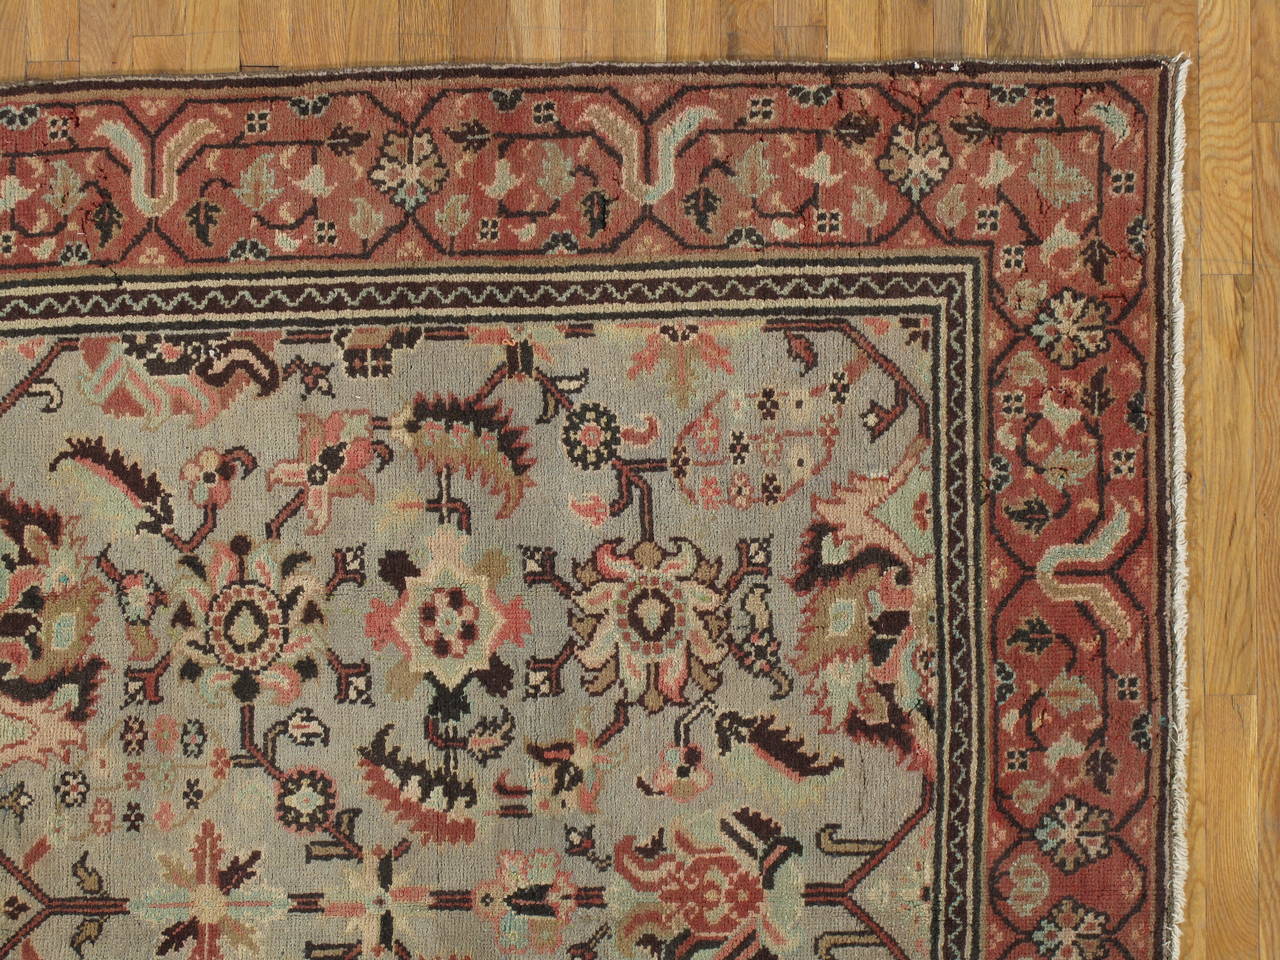 West Anatolia is one of the largest weaving regions in Turkey. Since the 15th century, Turkish rugs have always been on top of the list for having Fine oriental rugs. Measure: 5'10